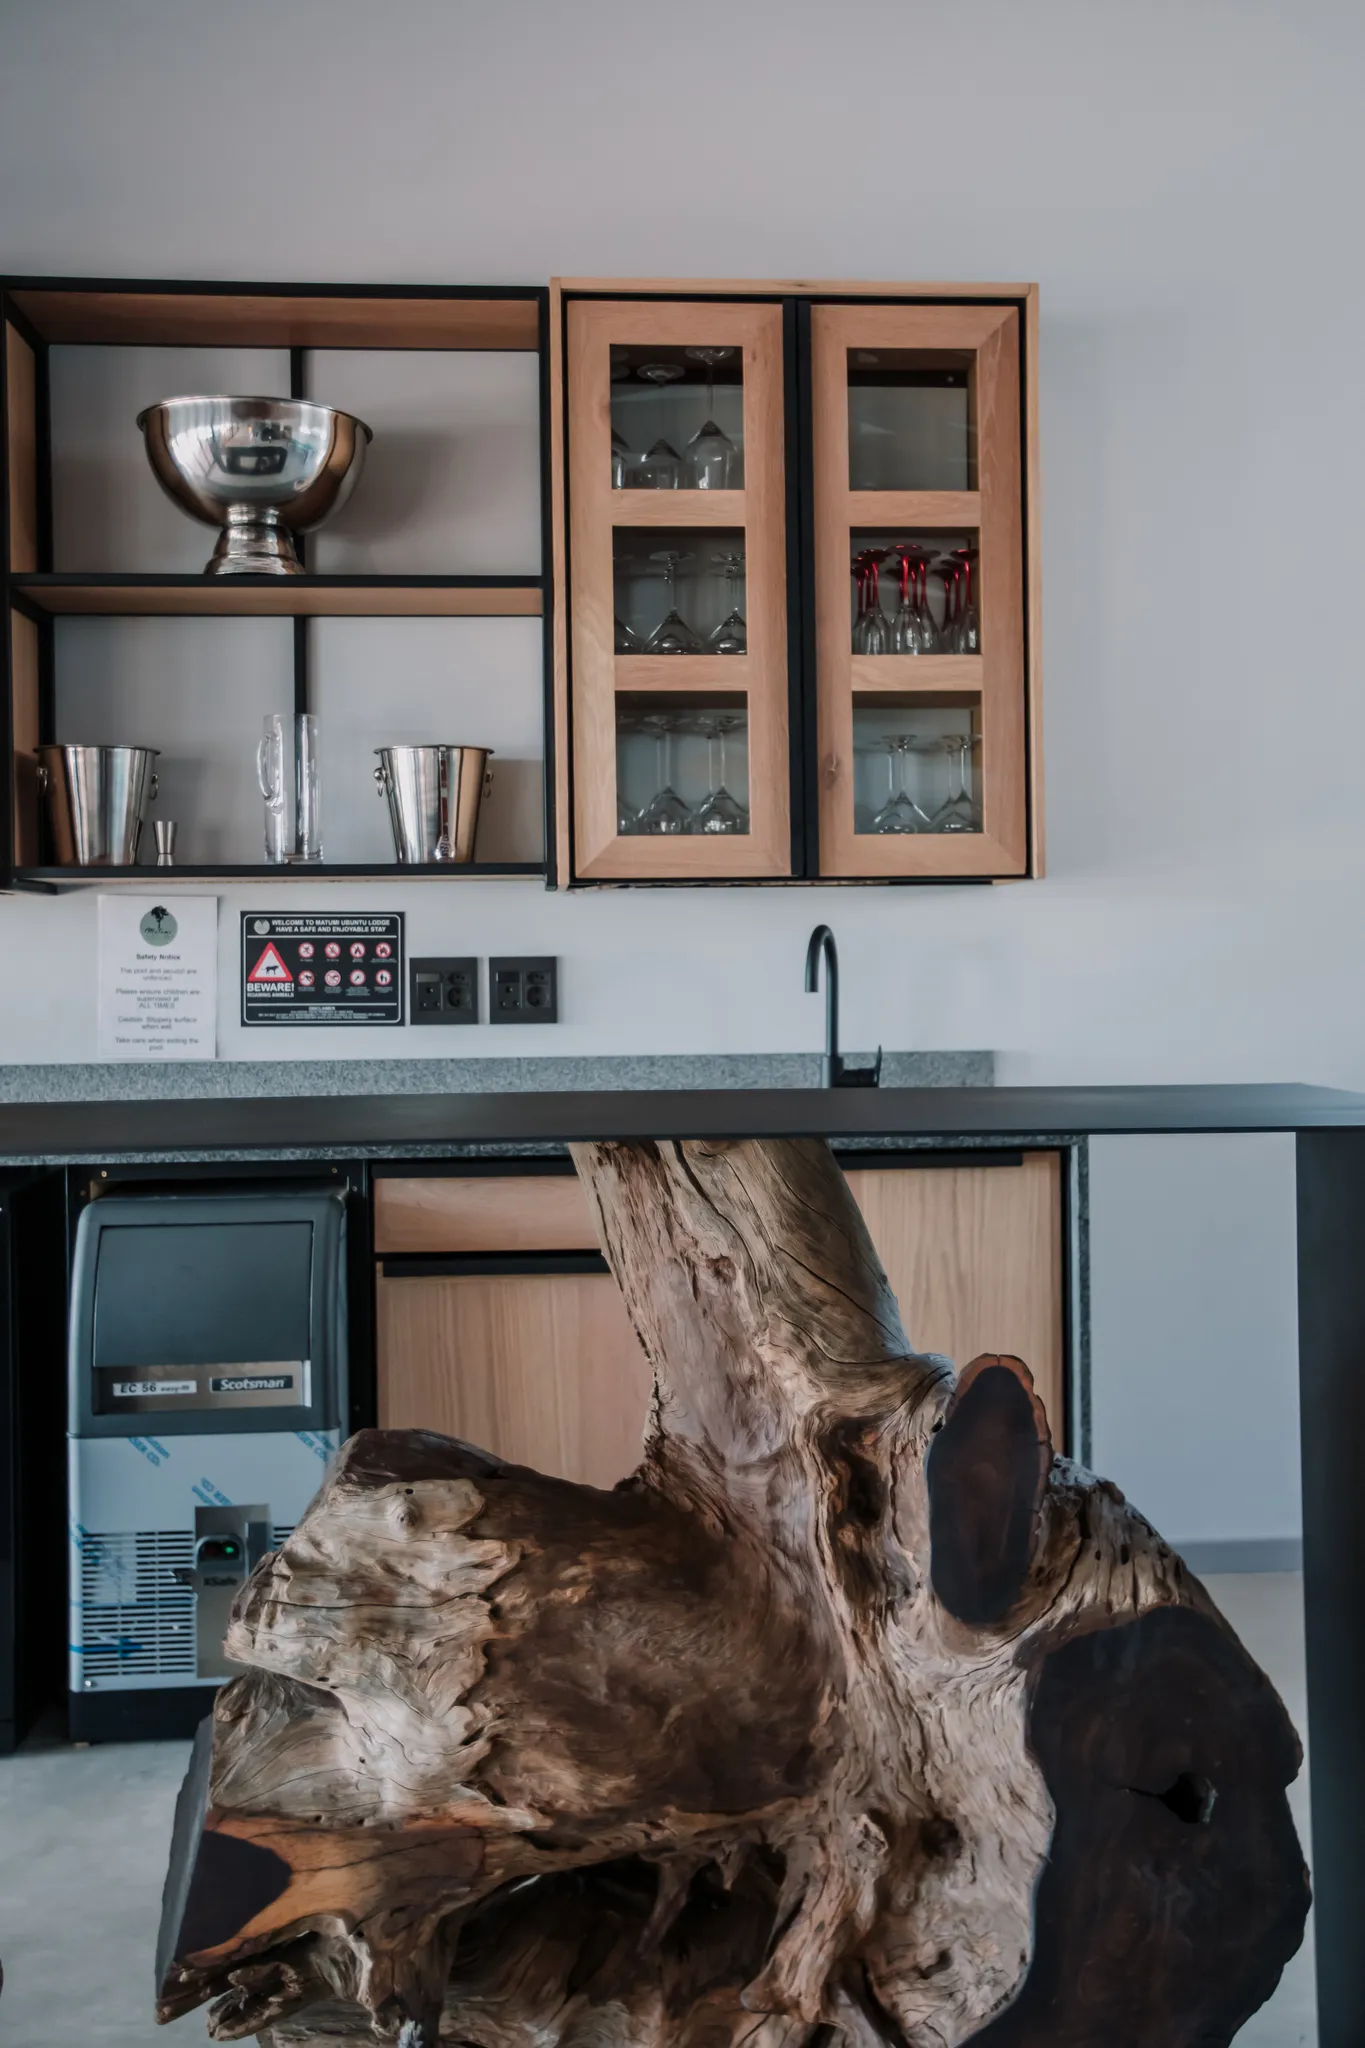 A table standing on a large tree stump in a modern kitchen with sink and built in shelves.